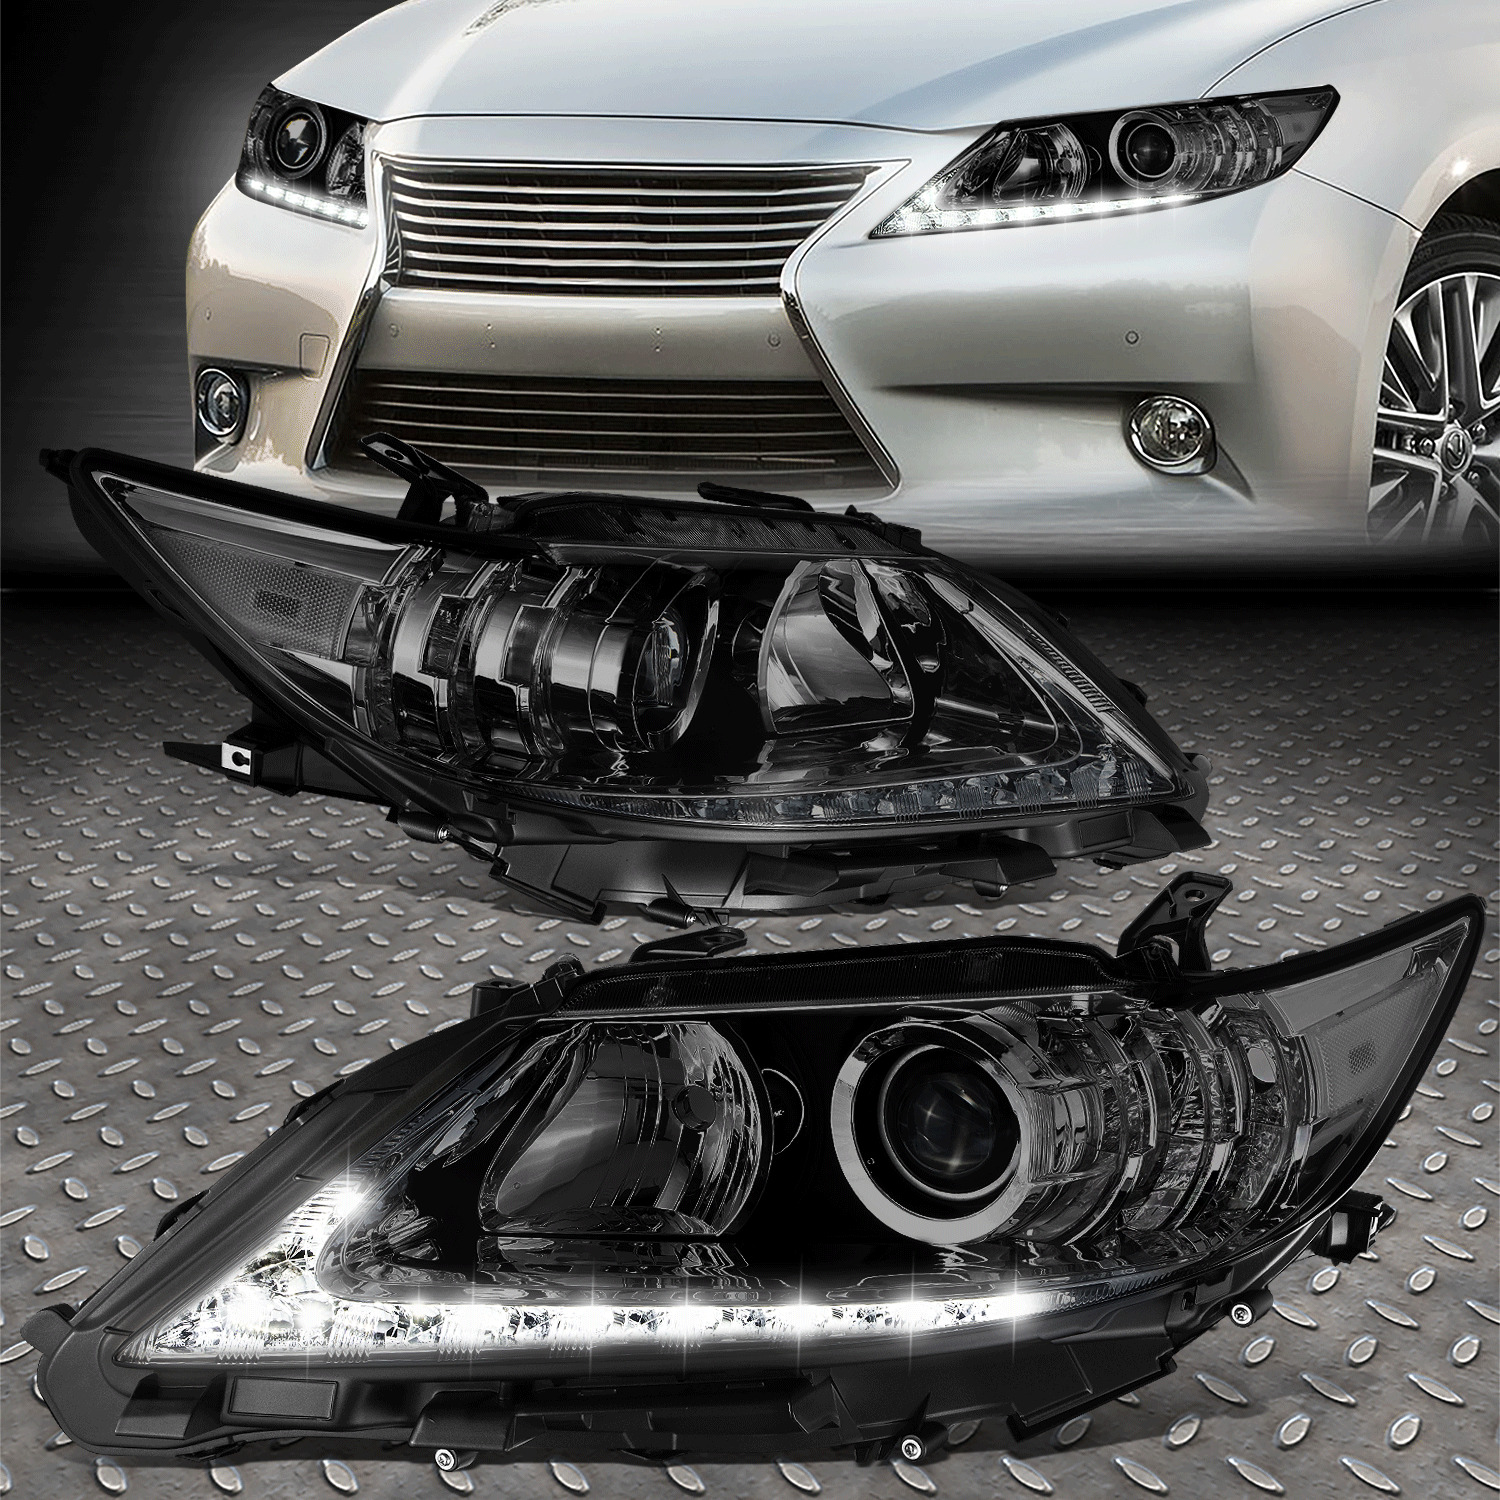 [LED DRL]FOR 13-15 LEXUS ES300H ES350 OE STYLE PROJECTOR HEADLIGHTS SMOKED/CLEAR